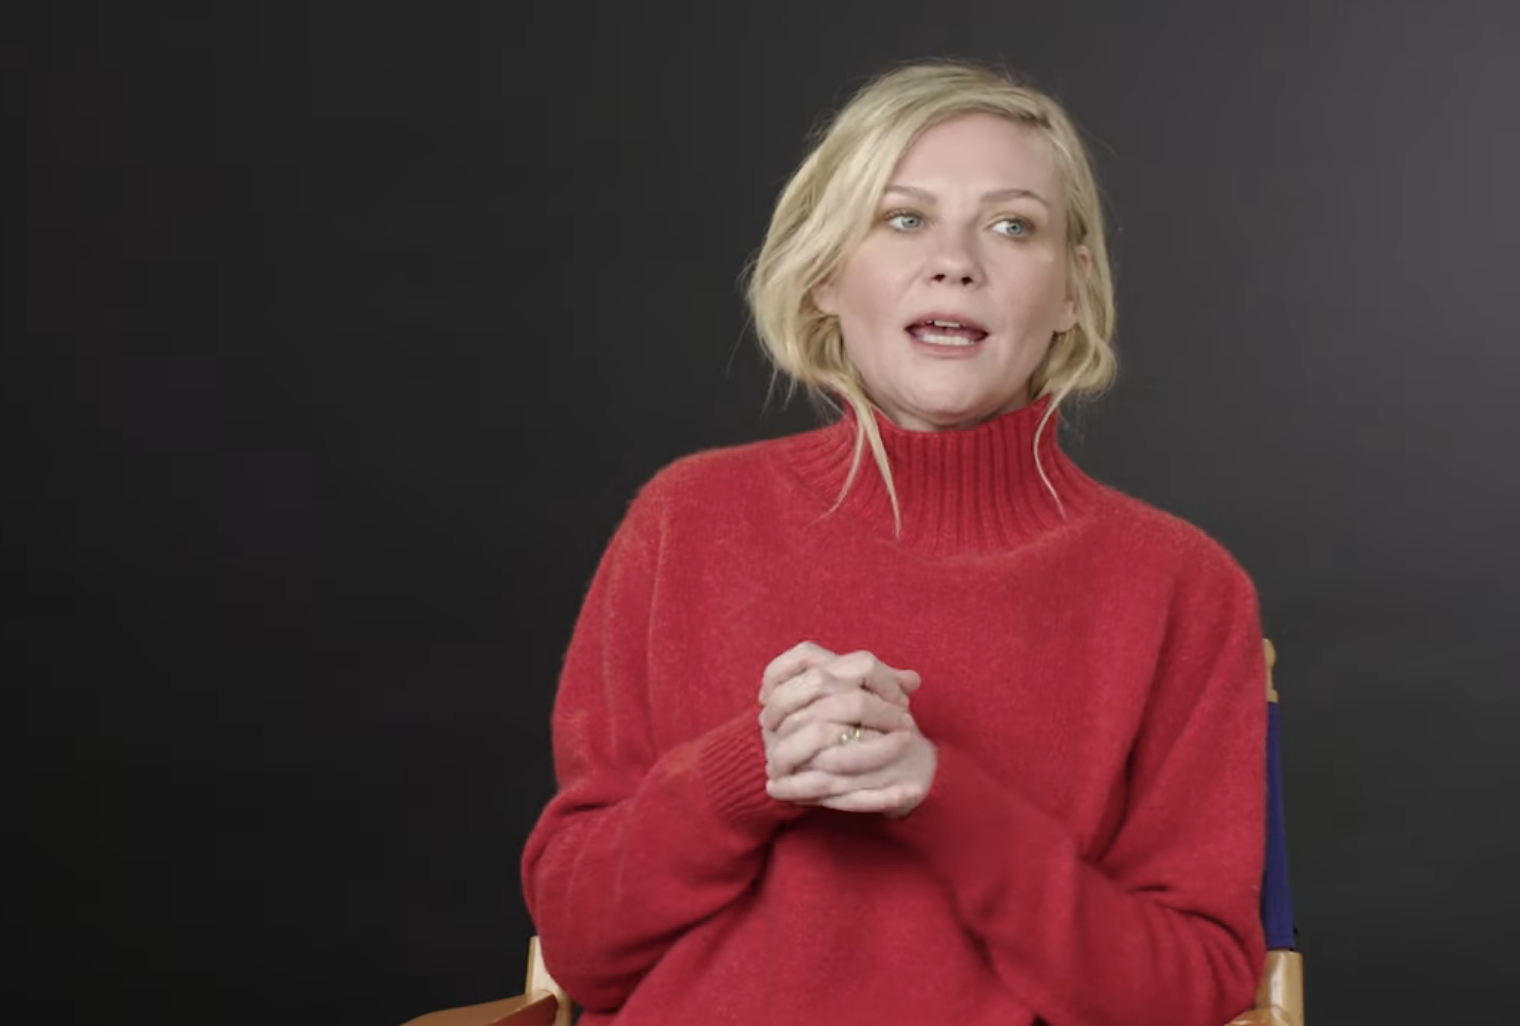 Kristen Dunst breaks down her most iconic roles in a video interview